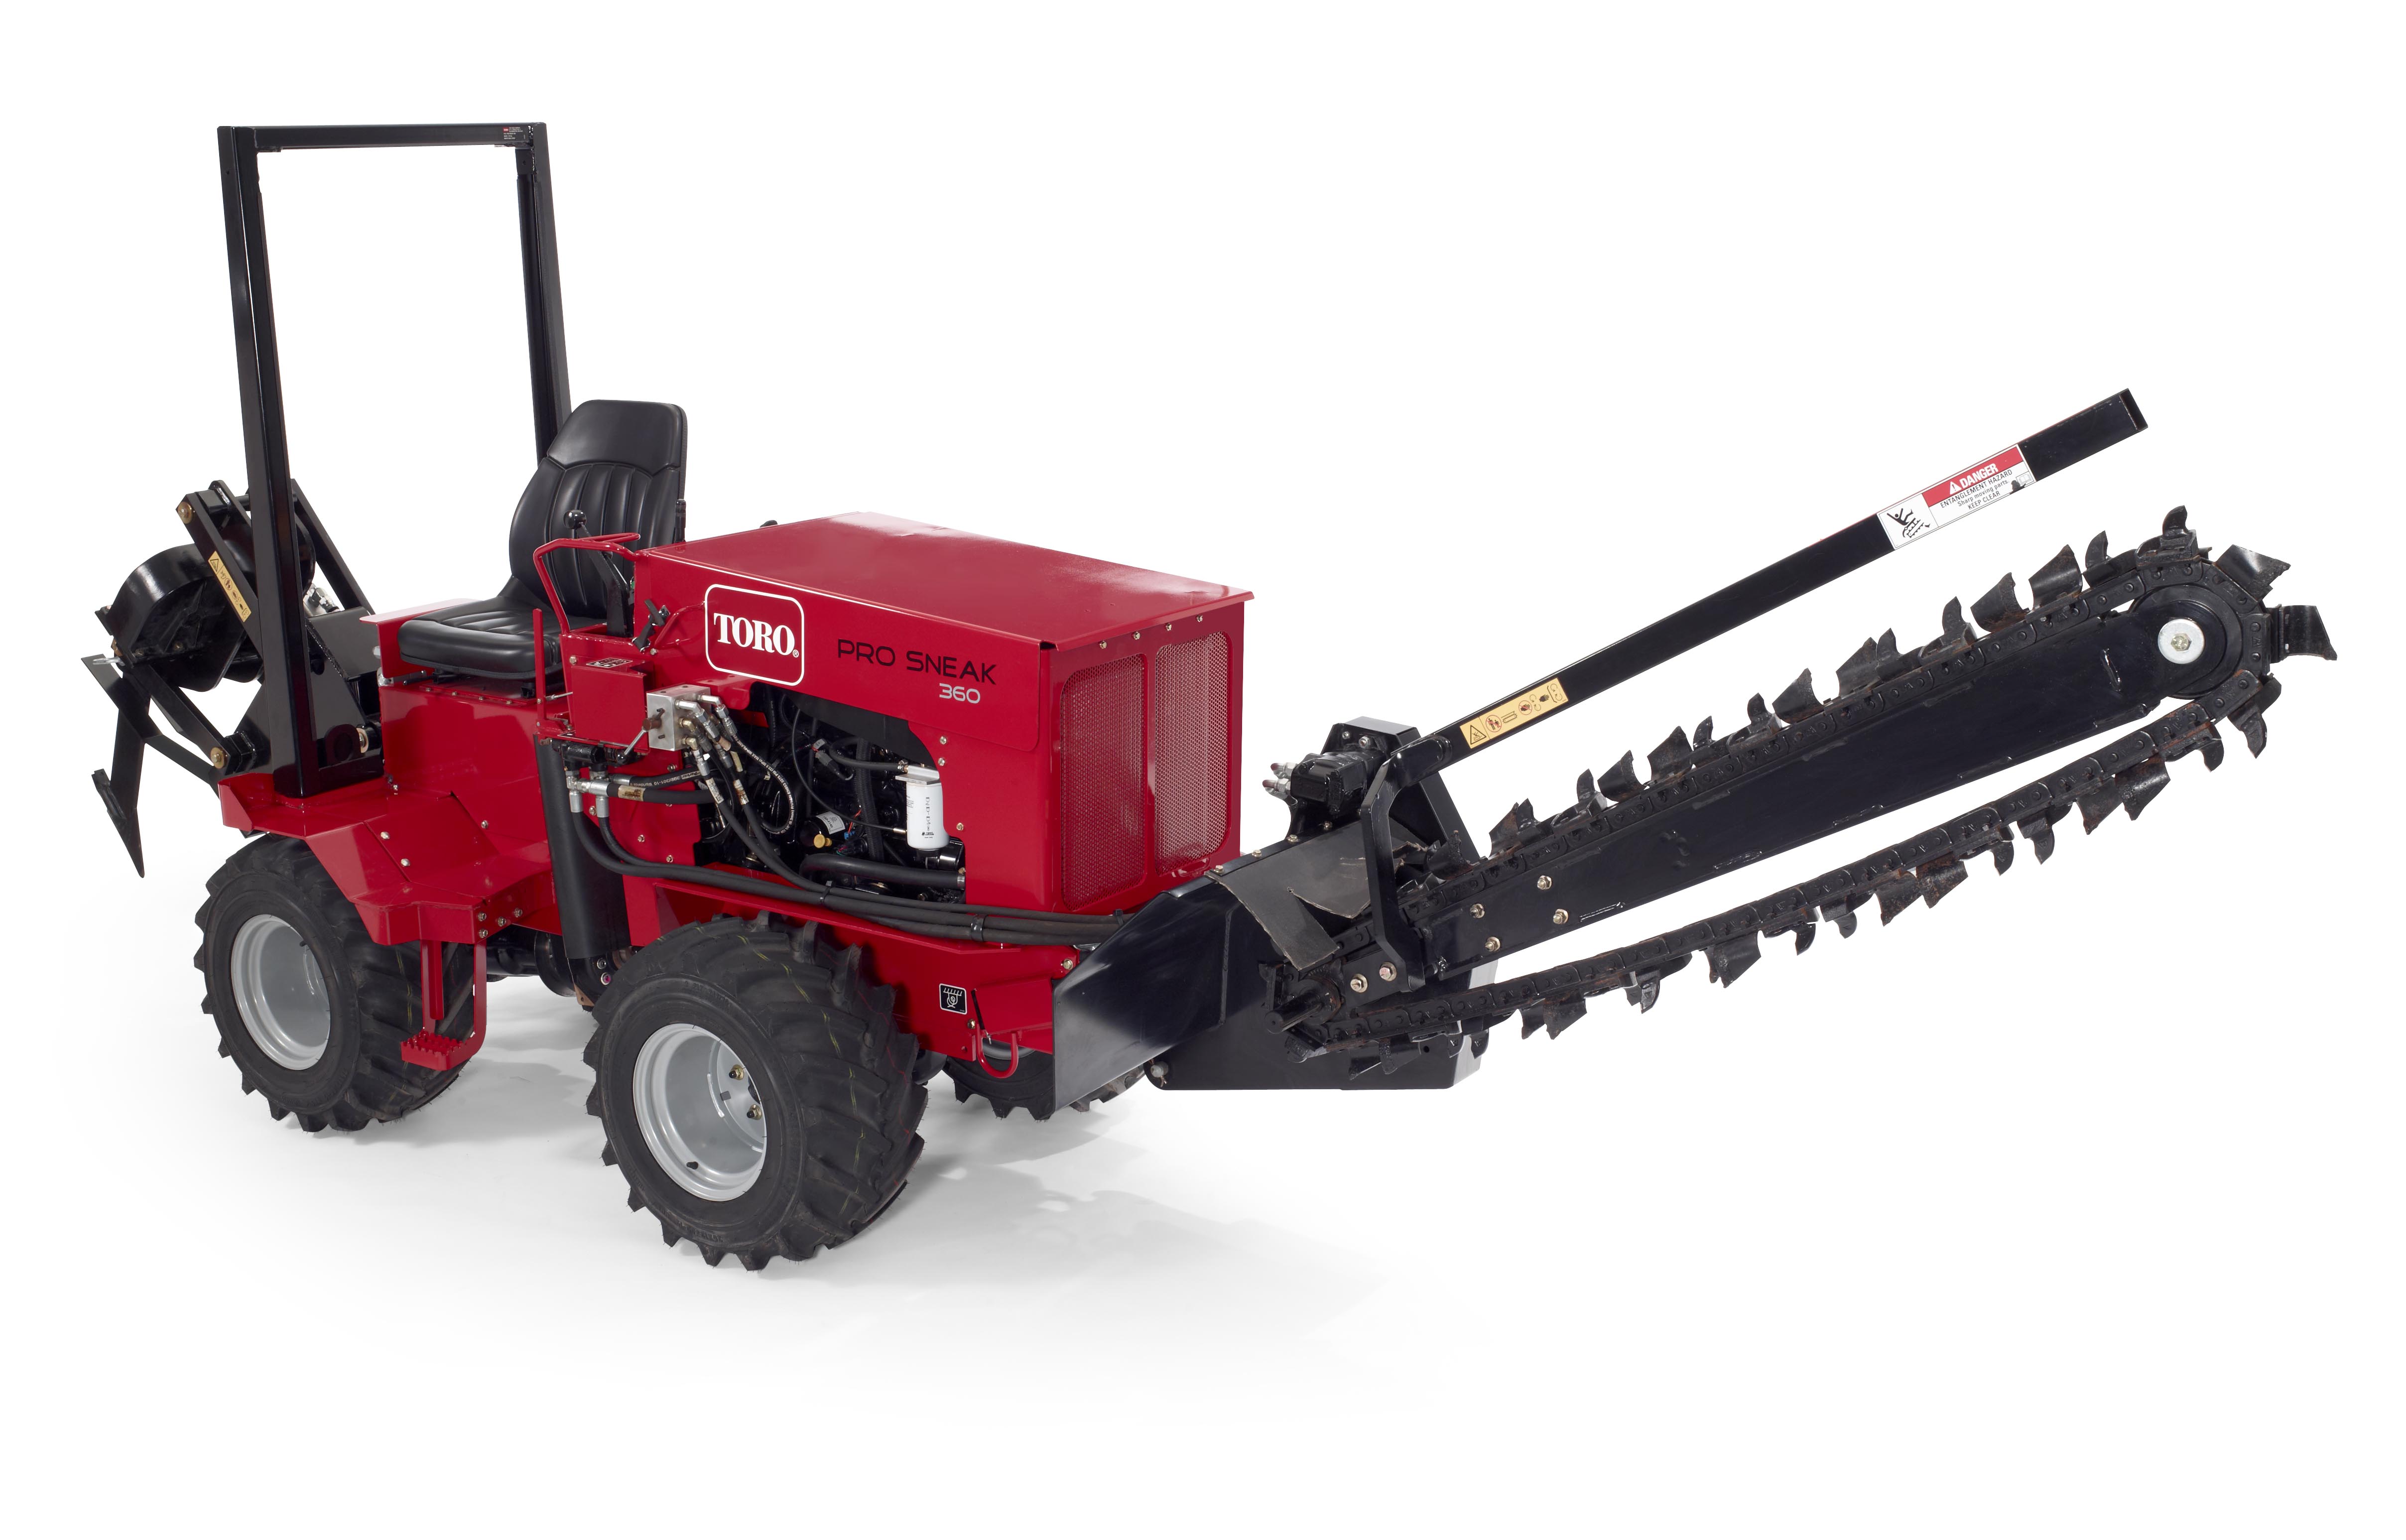 Strong Demand Tipped for New Toro Pro Sneak™ 360